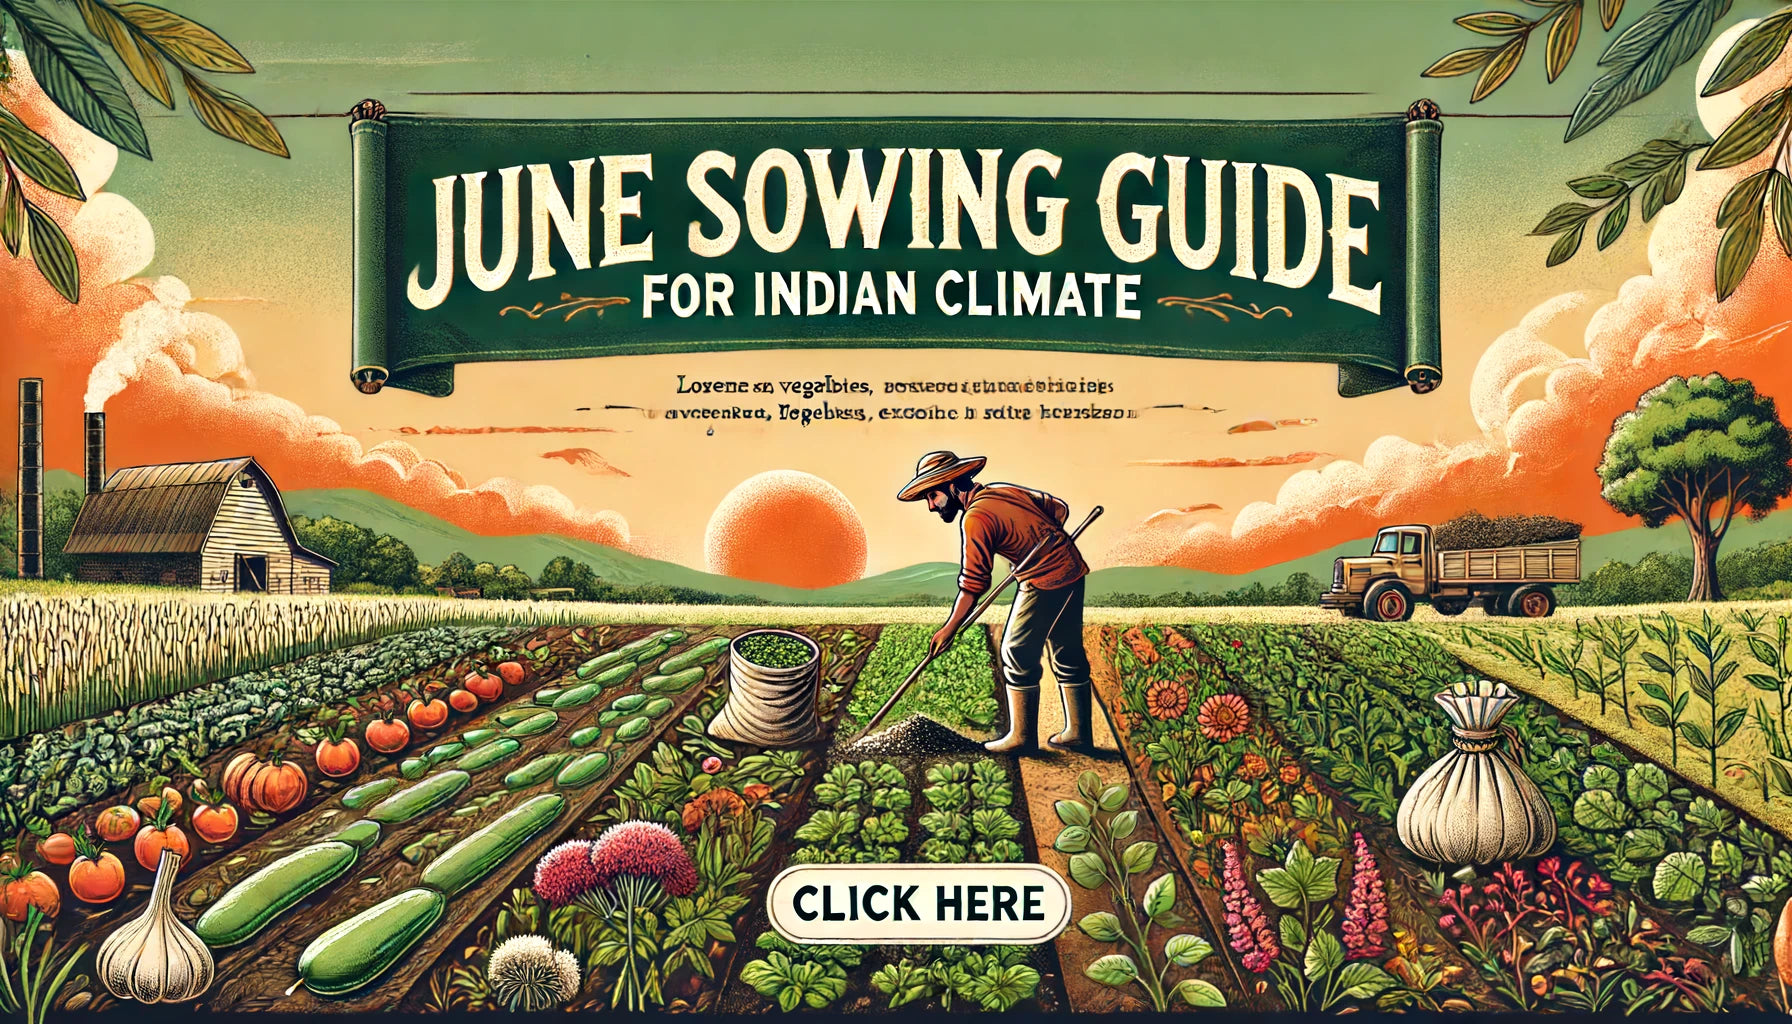 June Sowing Guide for Vegetables, Flowers, and Exotic Herbs in Indian Climate